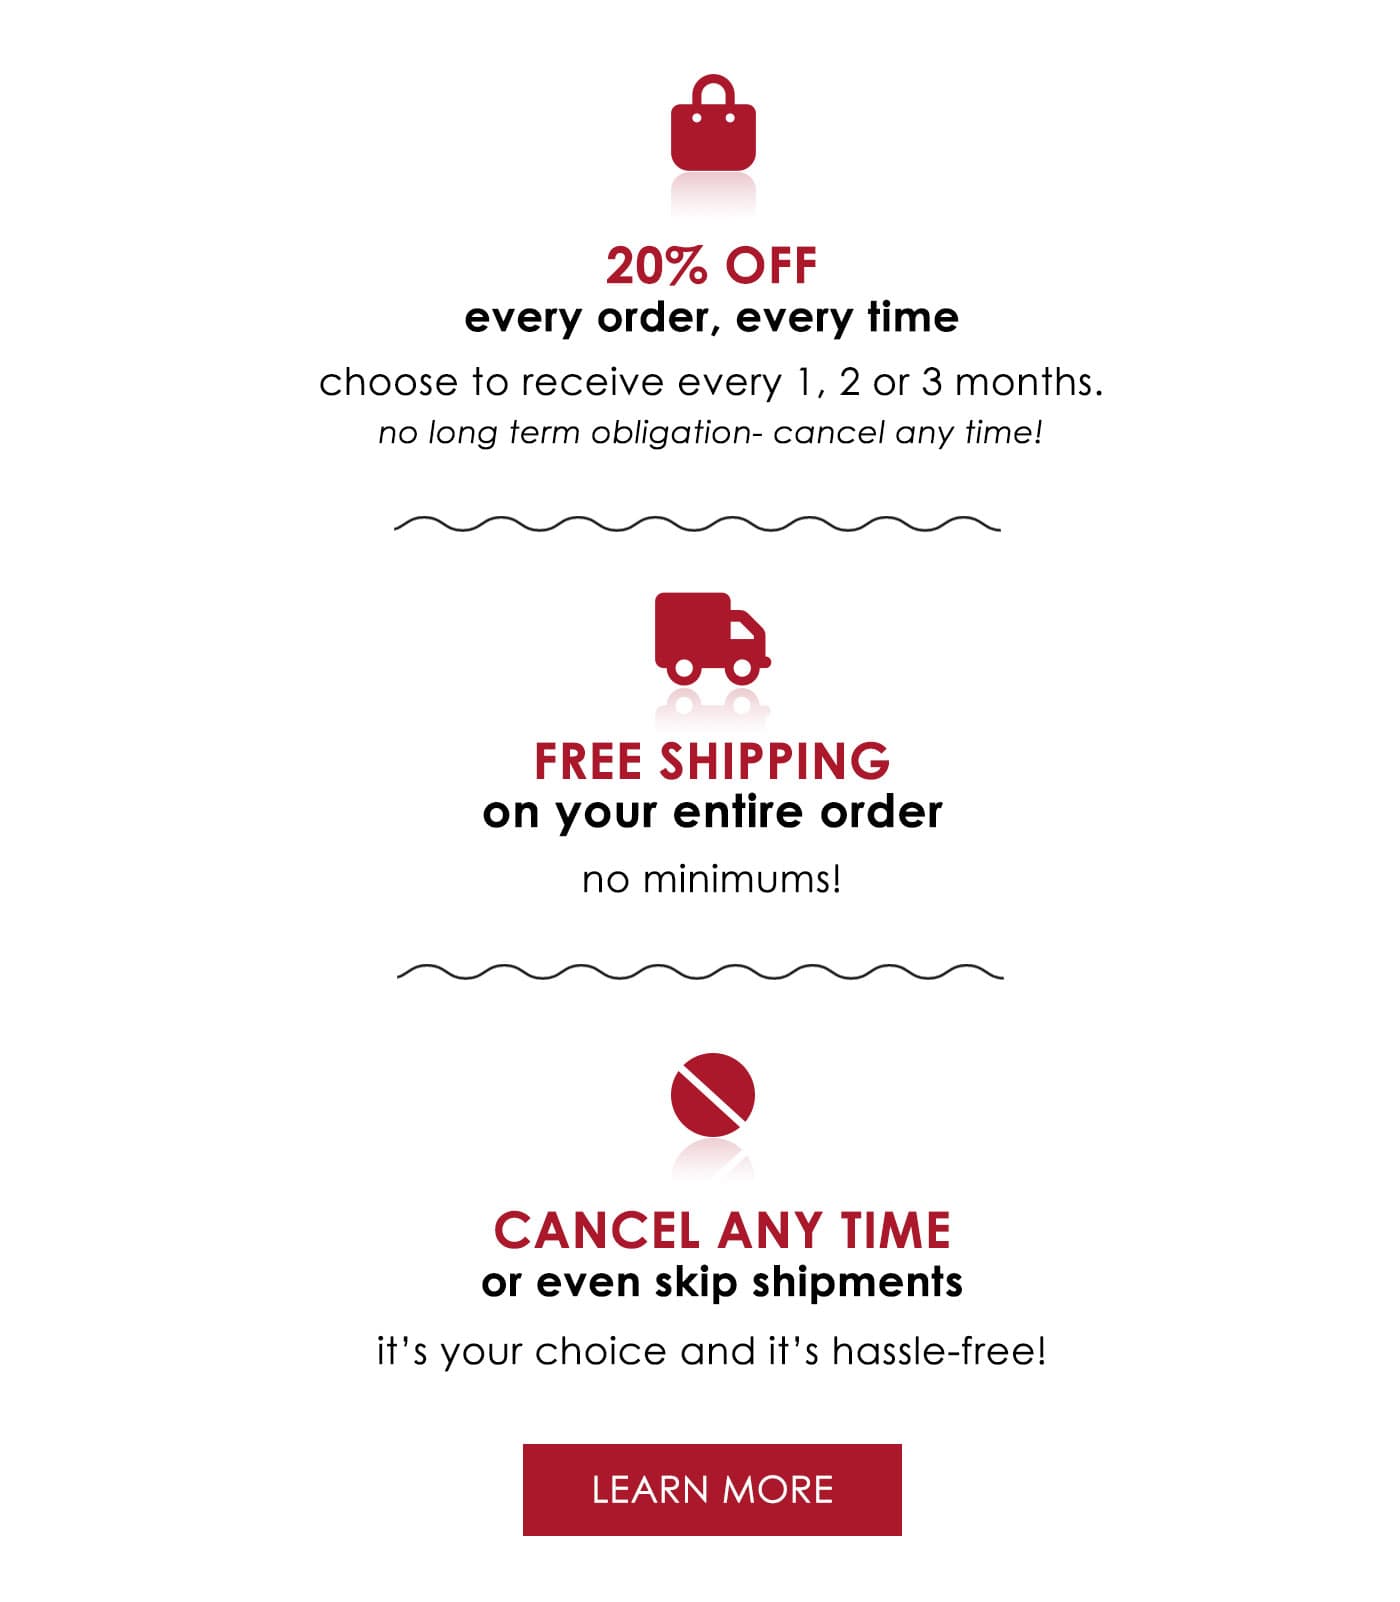 20% off Every Order, Every Time, Free Shipping and Cancel Any Time